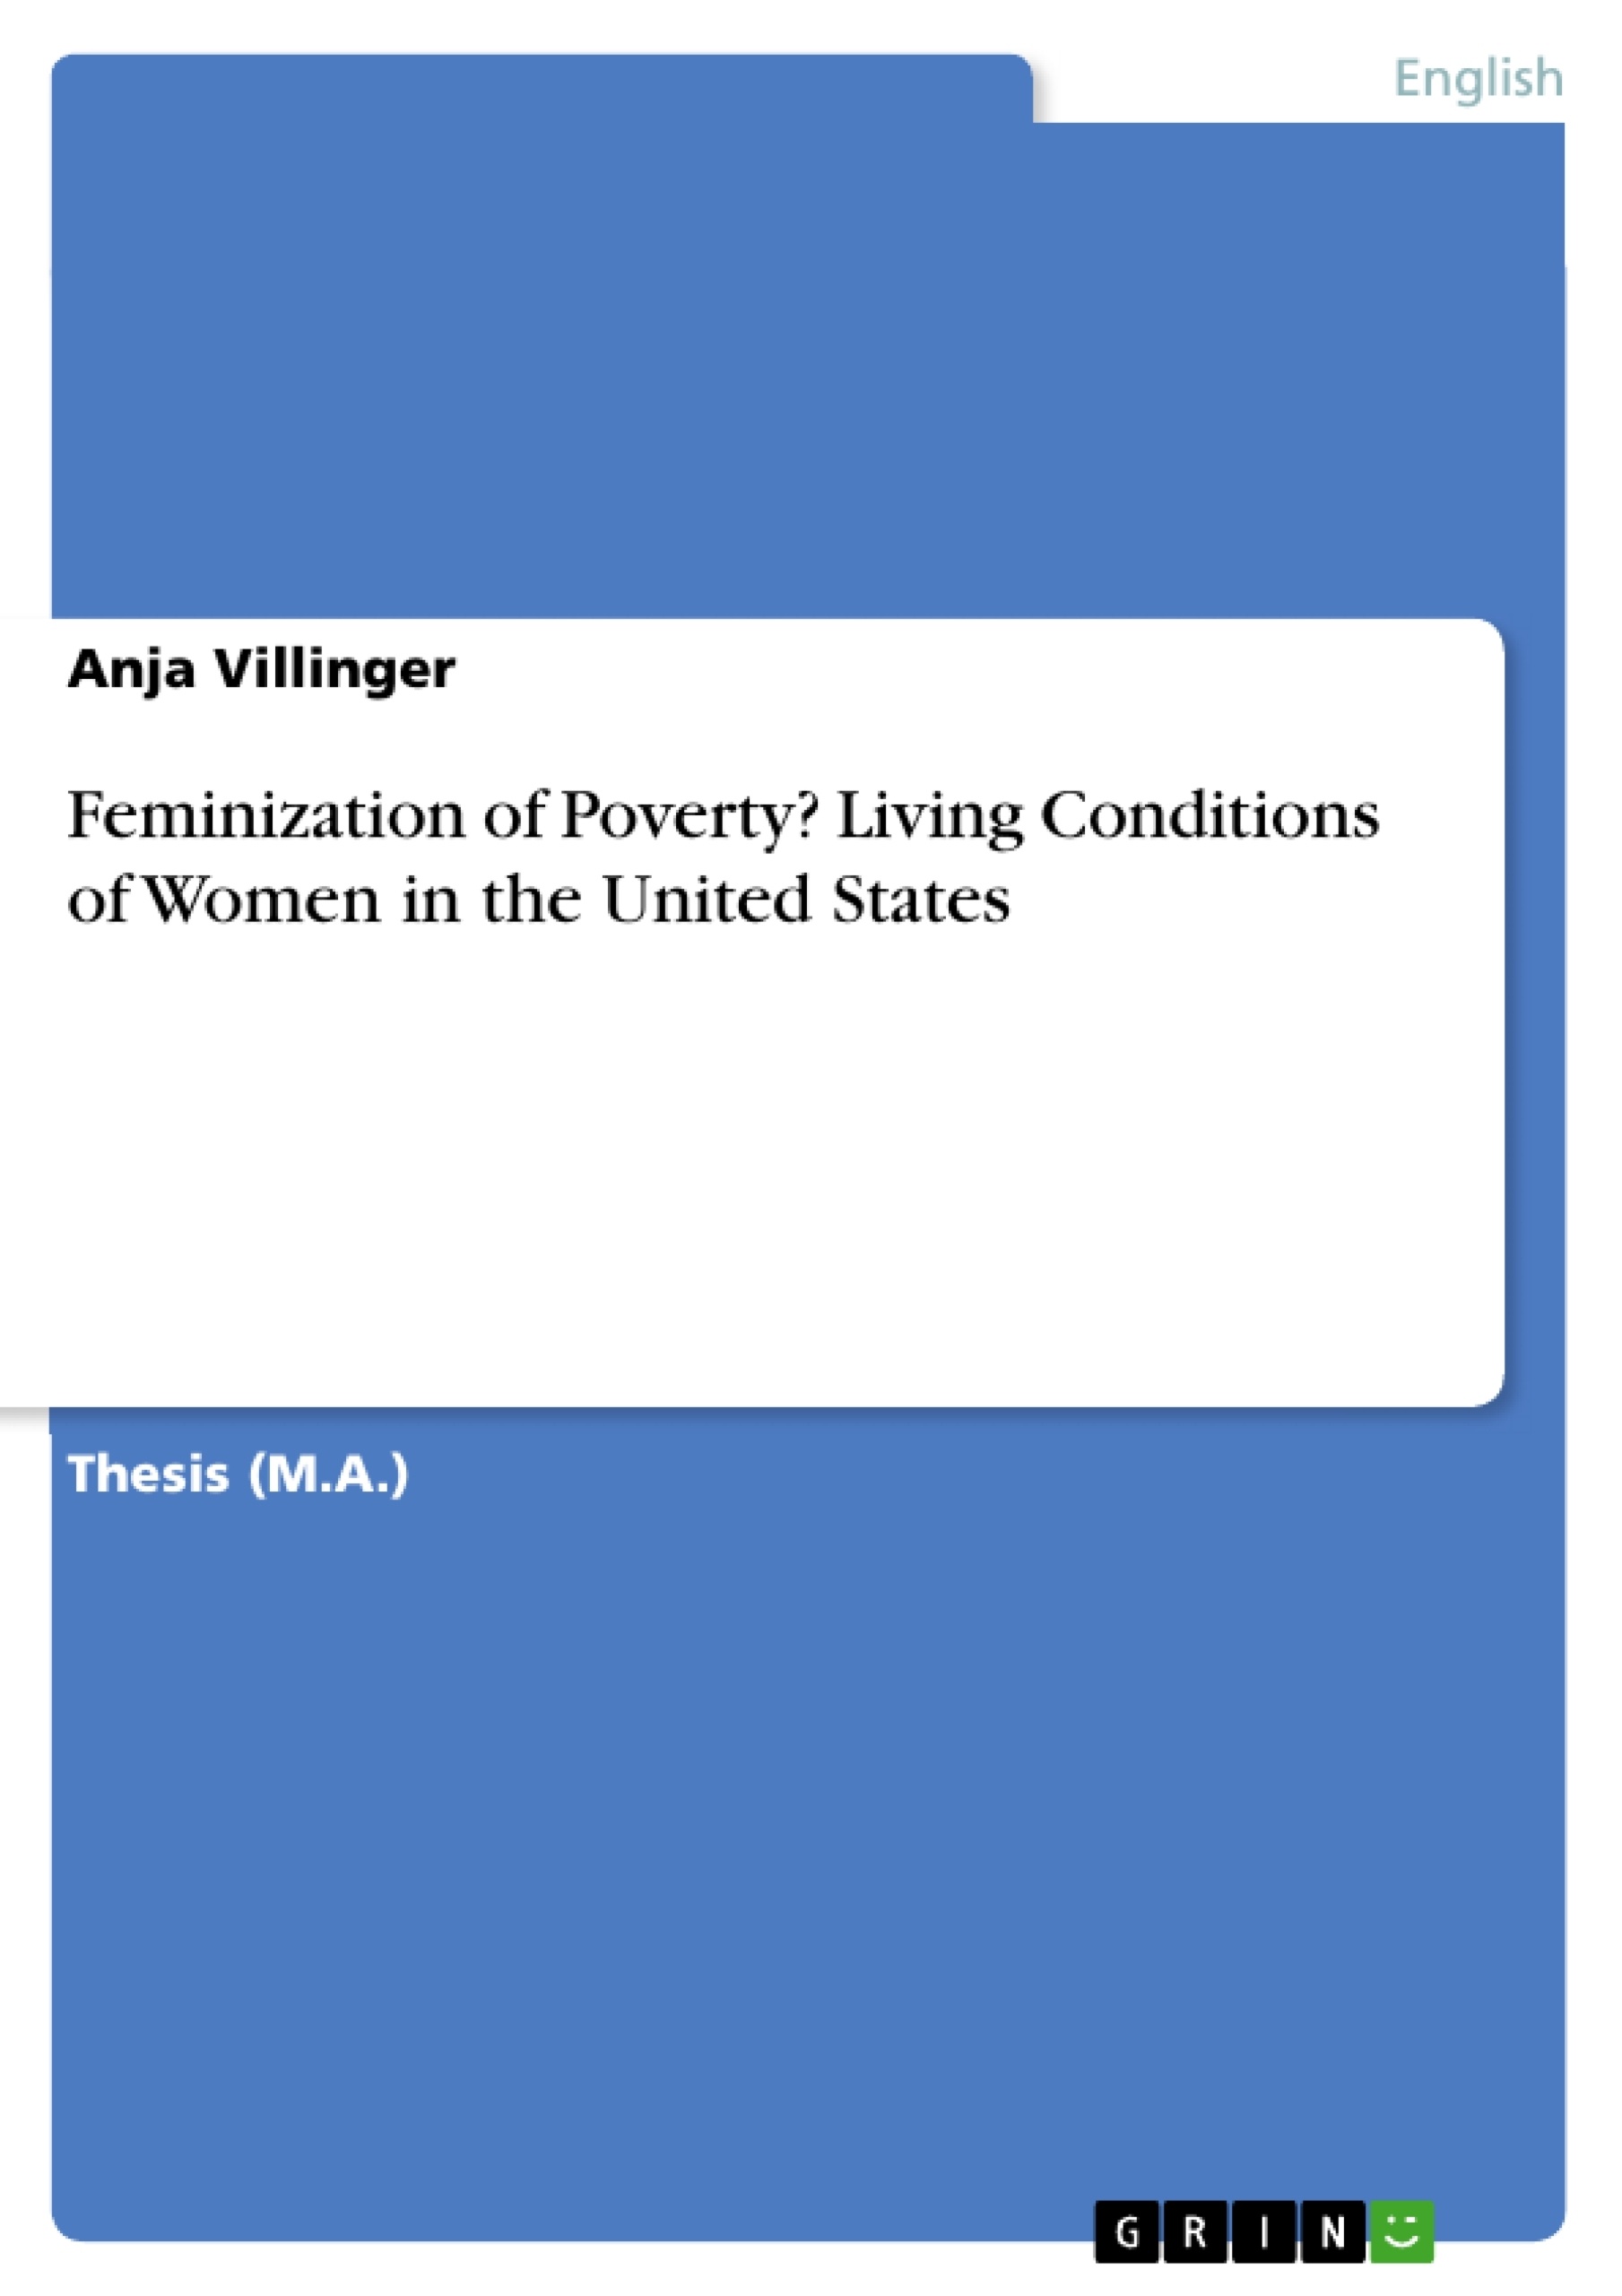 Titre: Feminization of Poverty? Living Conditions of Women in the United States